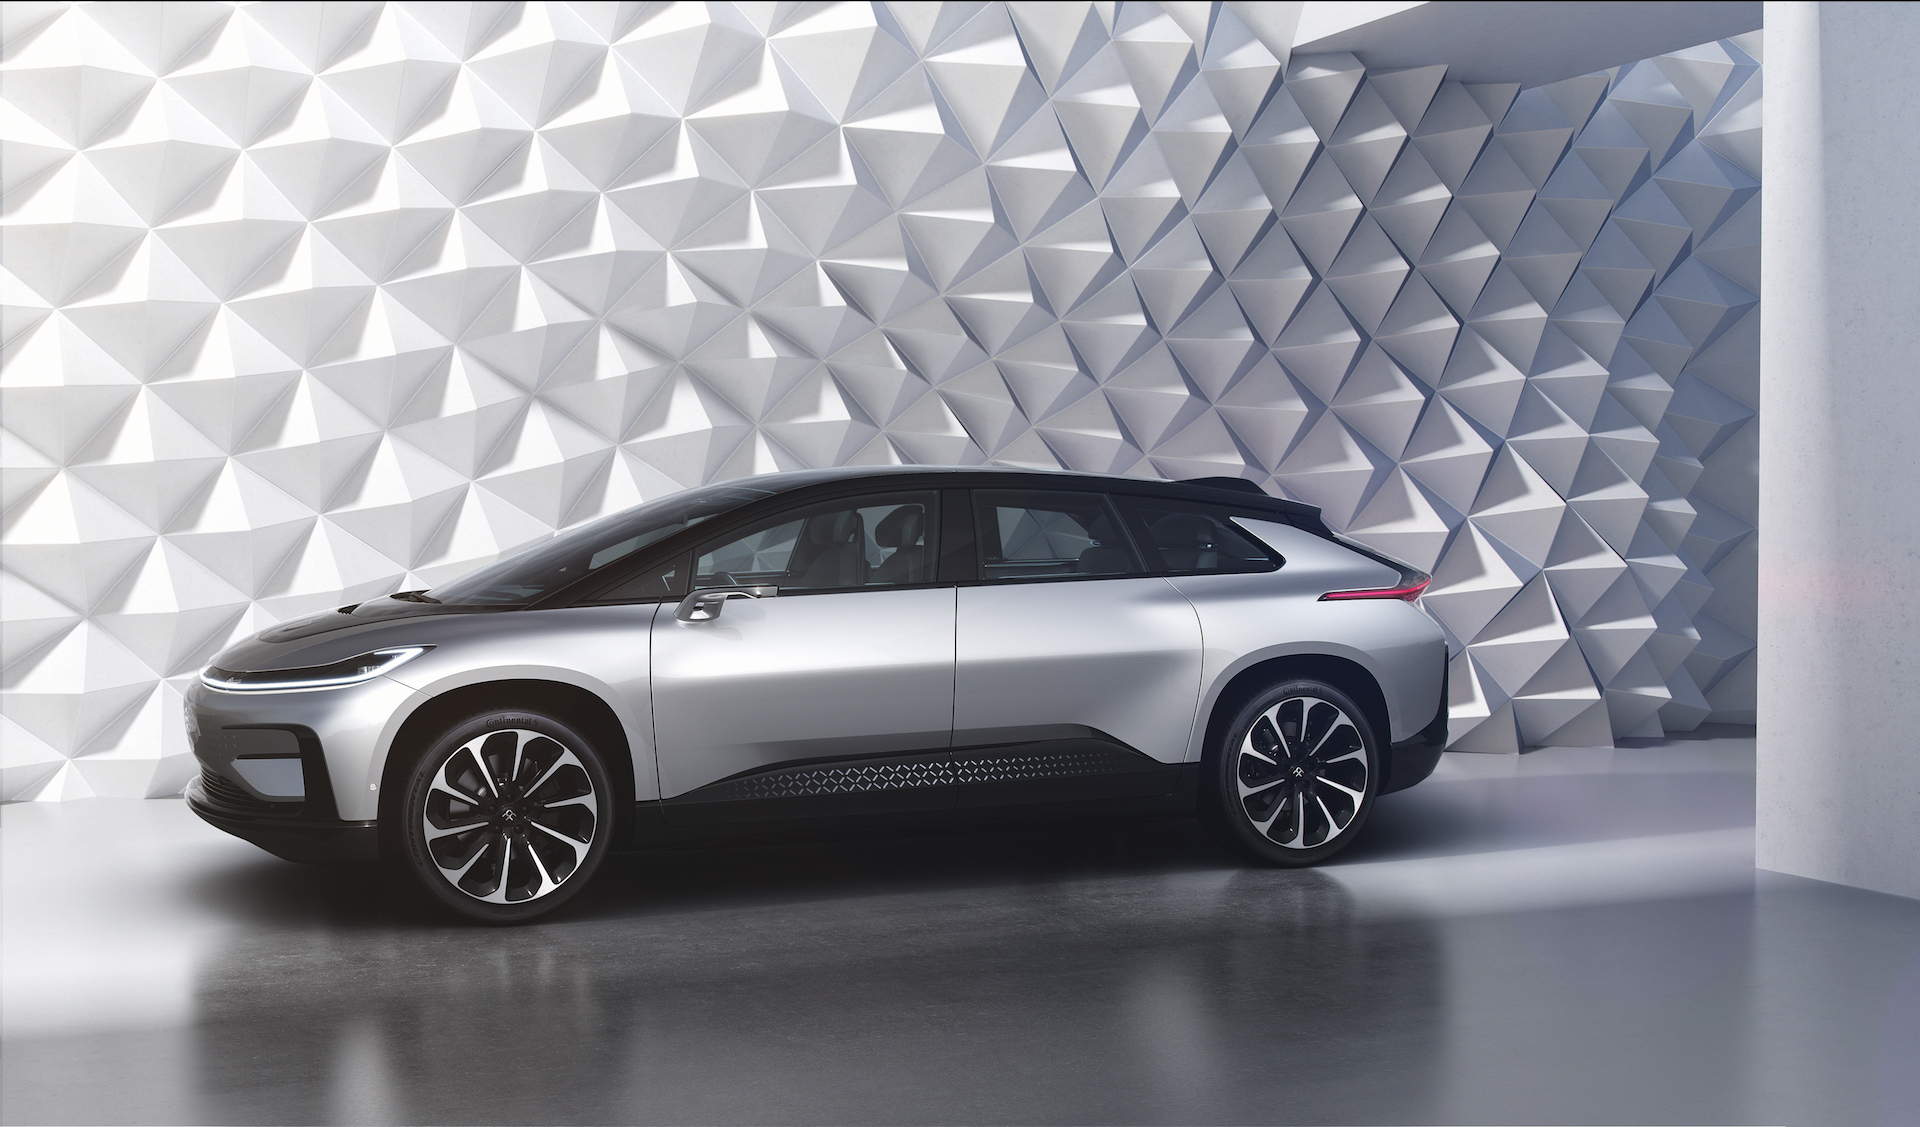 Faraday Future FF 91 electric car to cost almost 300,000?